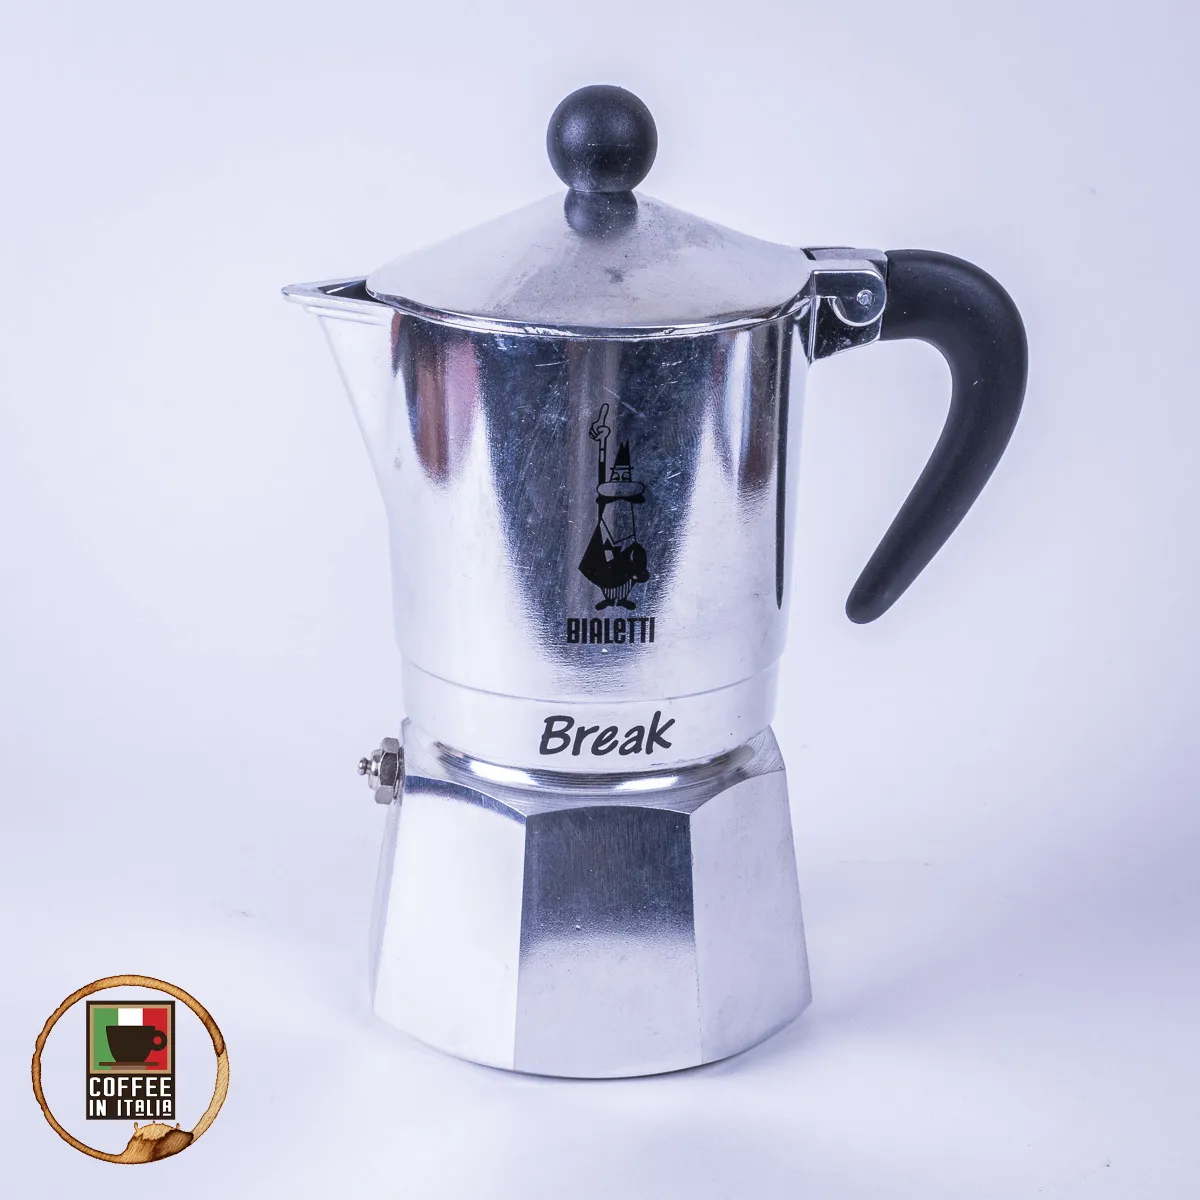 What Is Special About Bialetti - Break